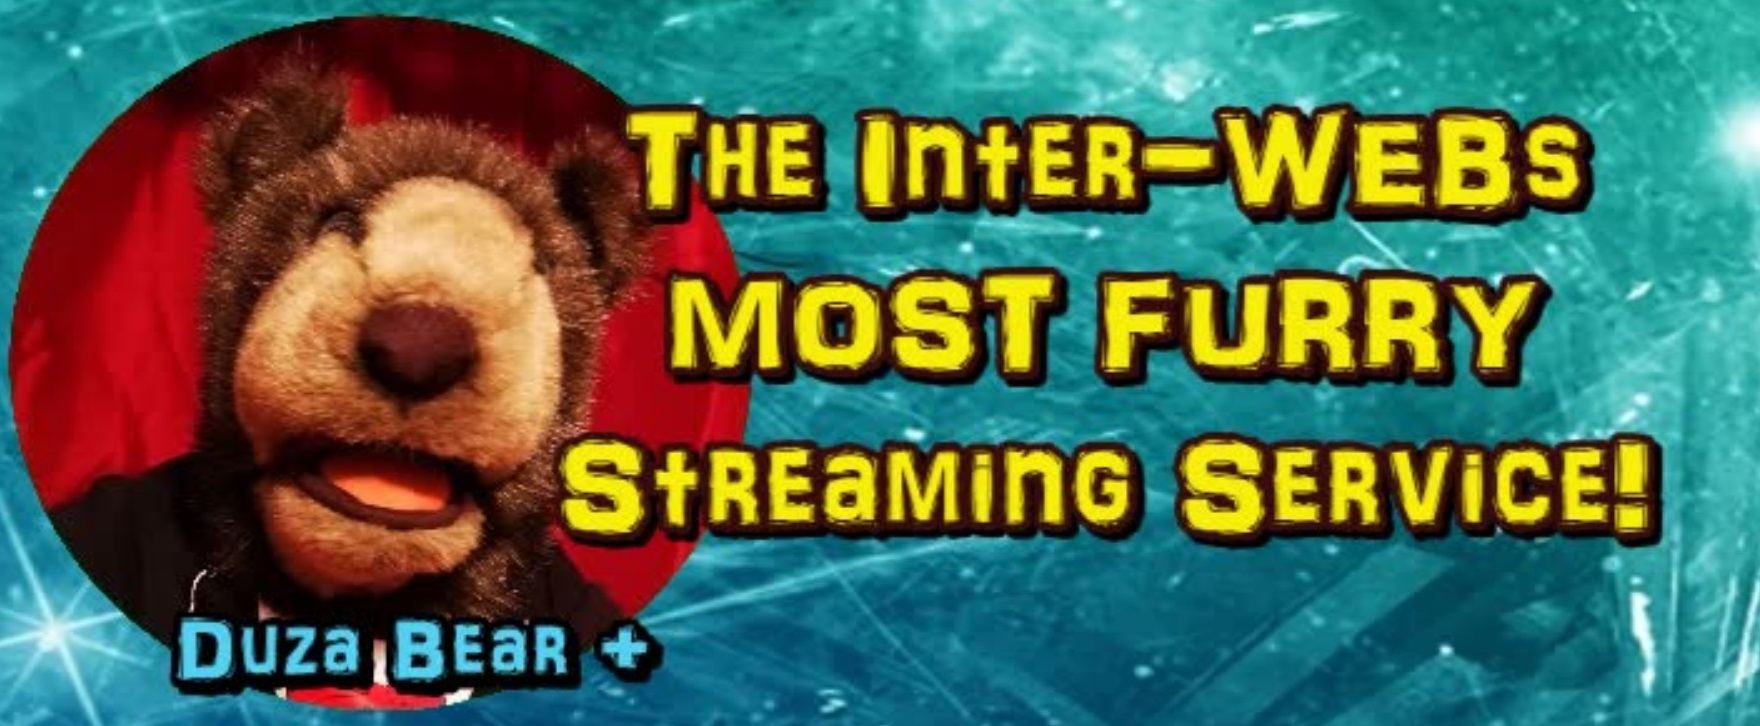 DUZA BEAR Plus - the Inter-Webs MOST FURRY Streaming Service